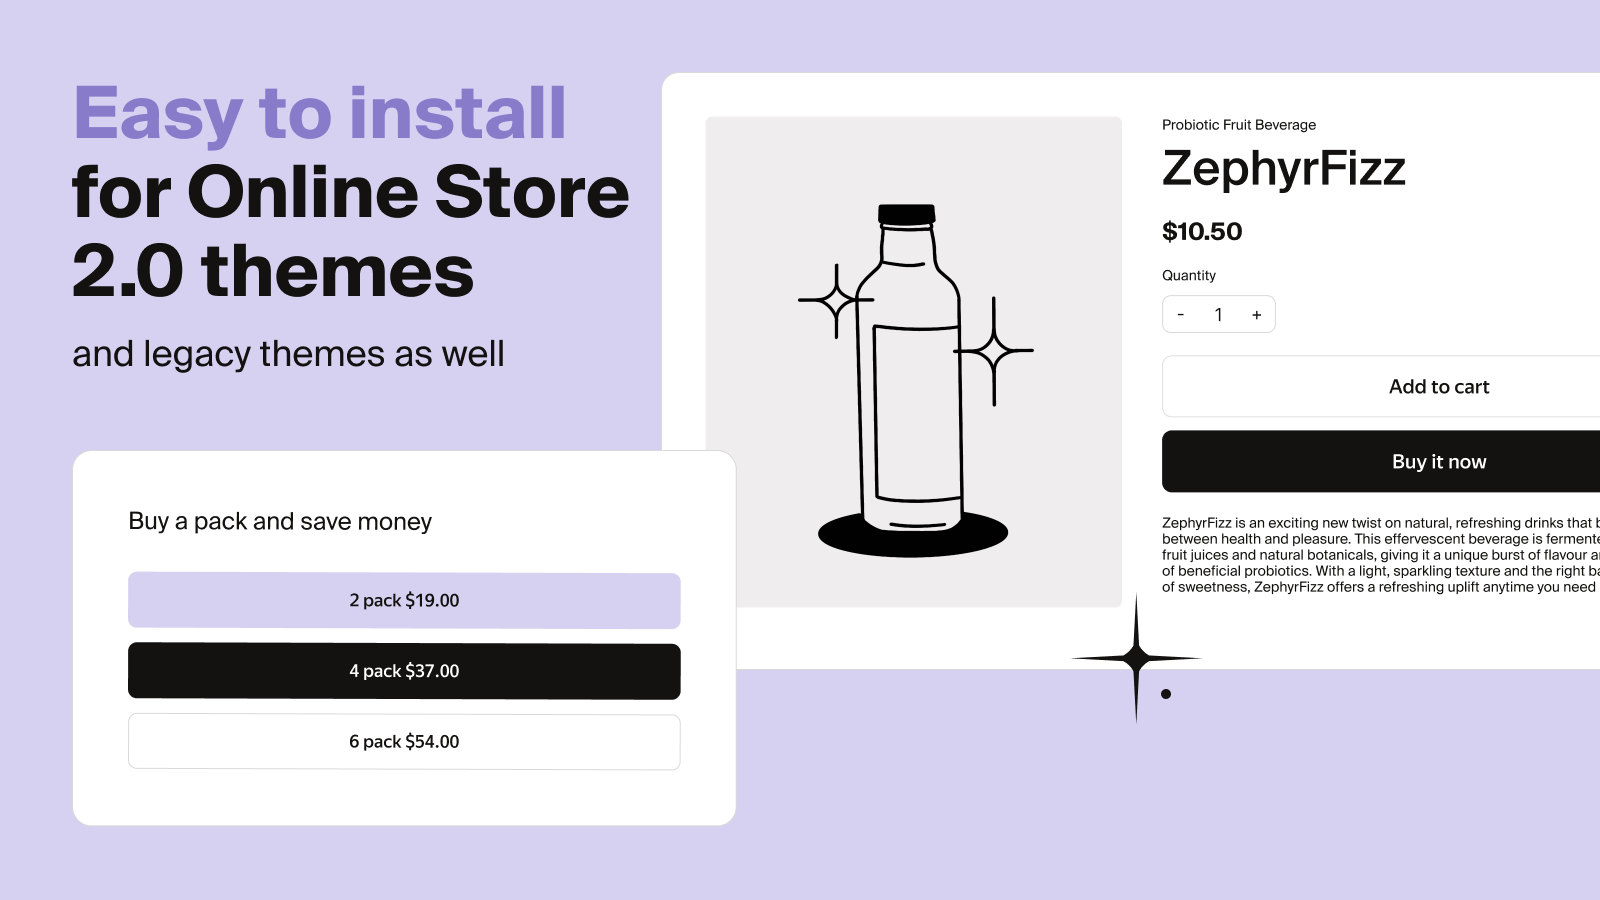 Easy to install for Online Store 2.0 themes